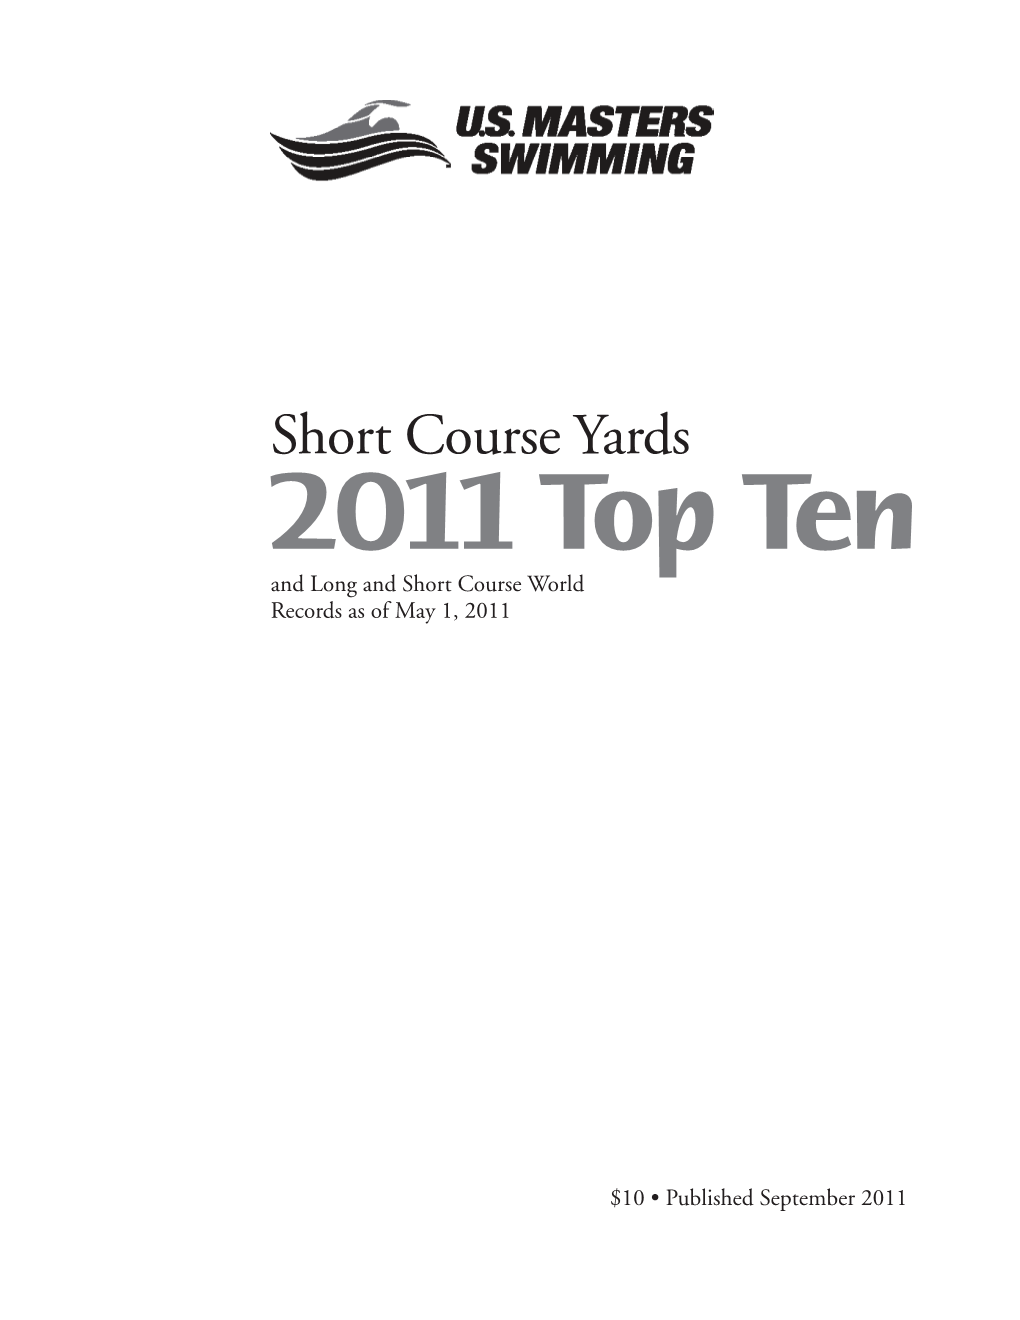 Short Course Yards 2011 Top Ten and Long and Short Course World Records As of May 1, 2011